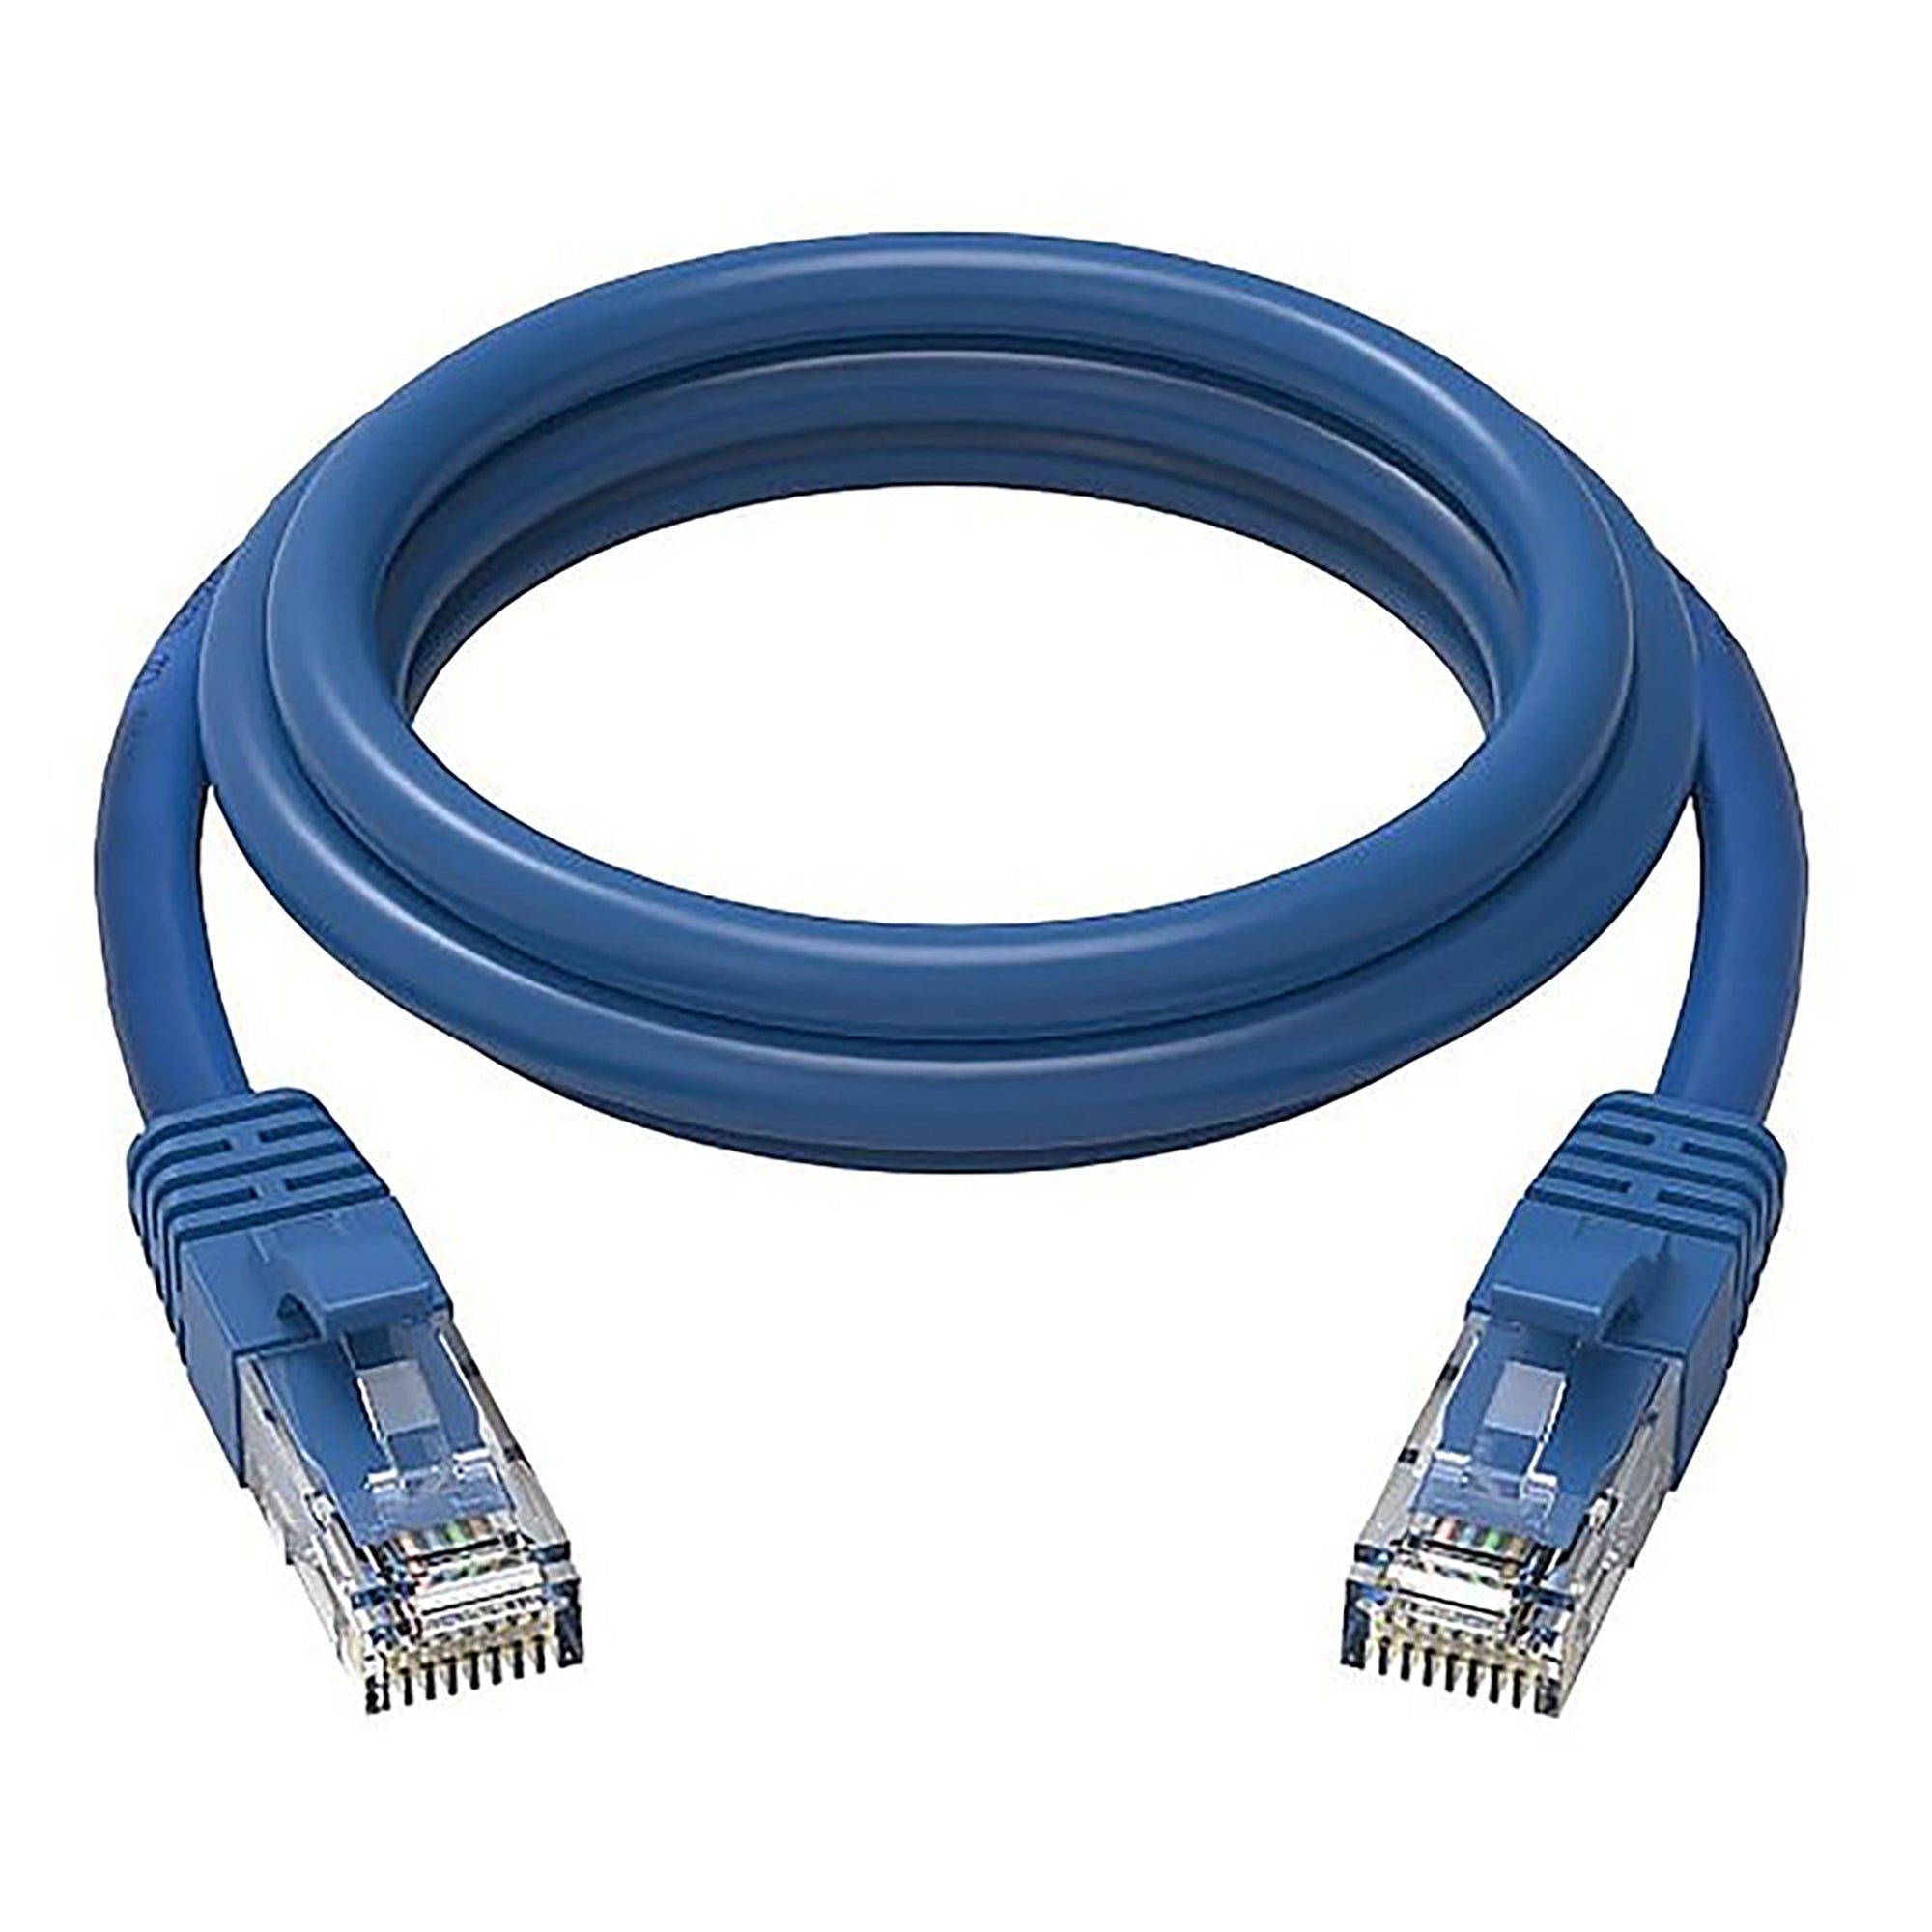 Cruxtec RC6-050-BL CAT6 10GbE Ethernet Cable, Blue (5 mtrs)